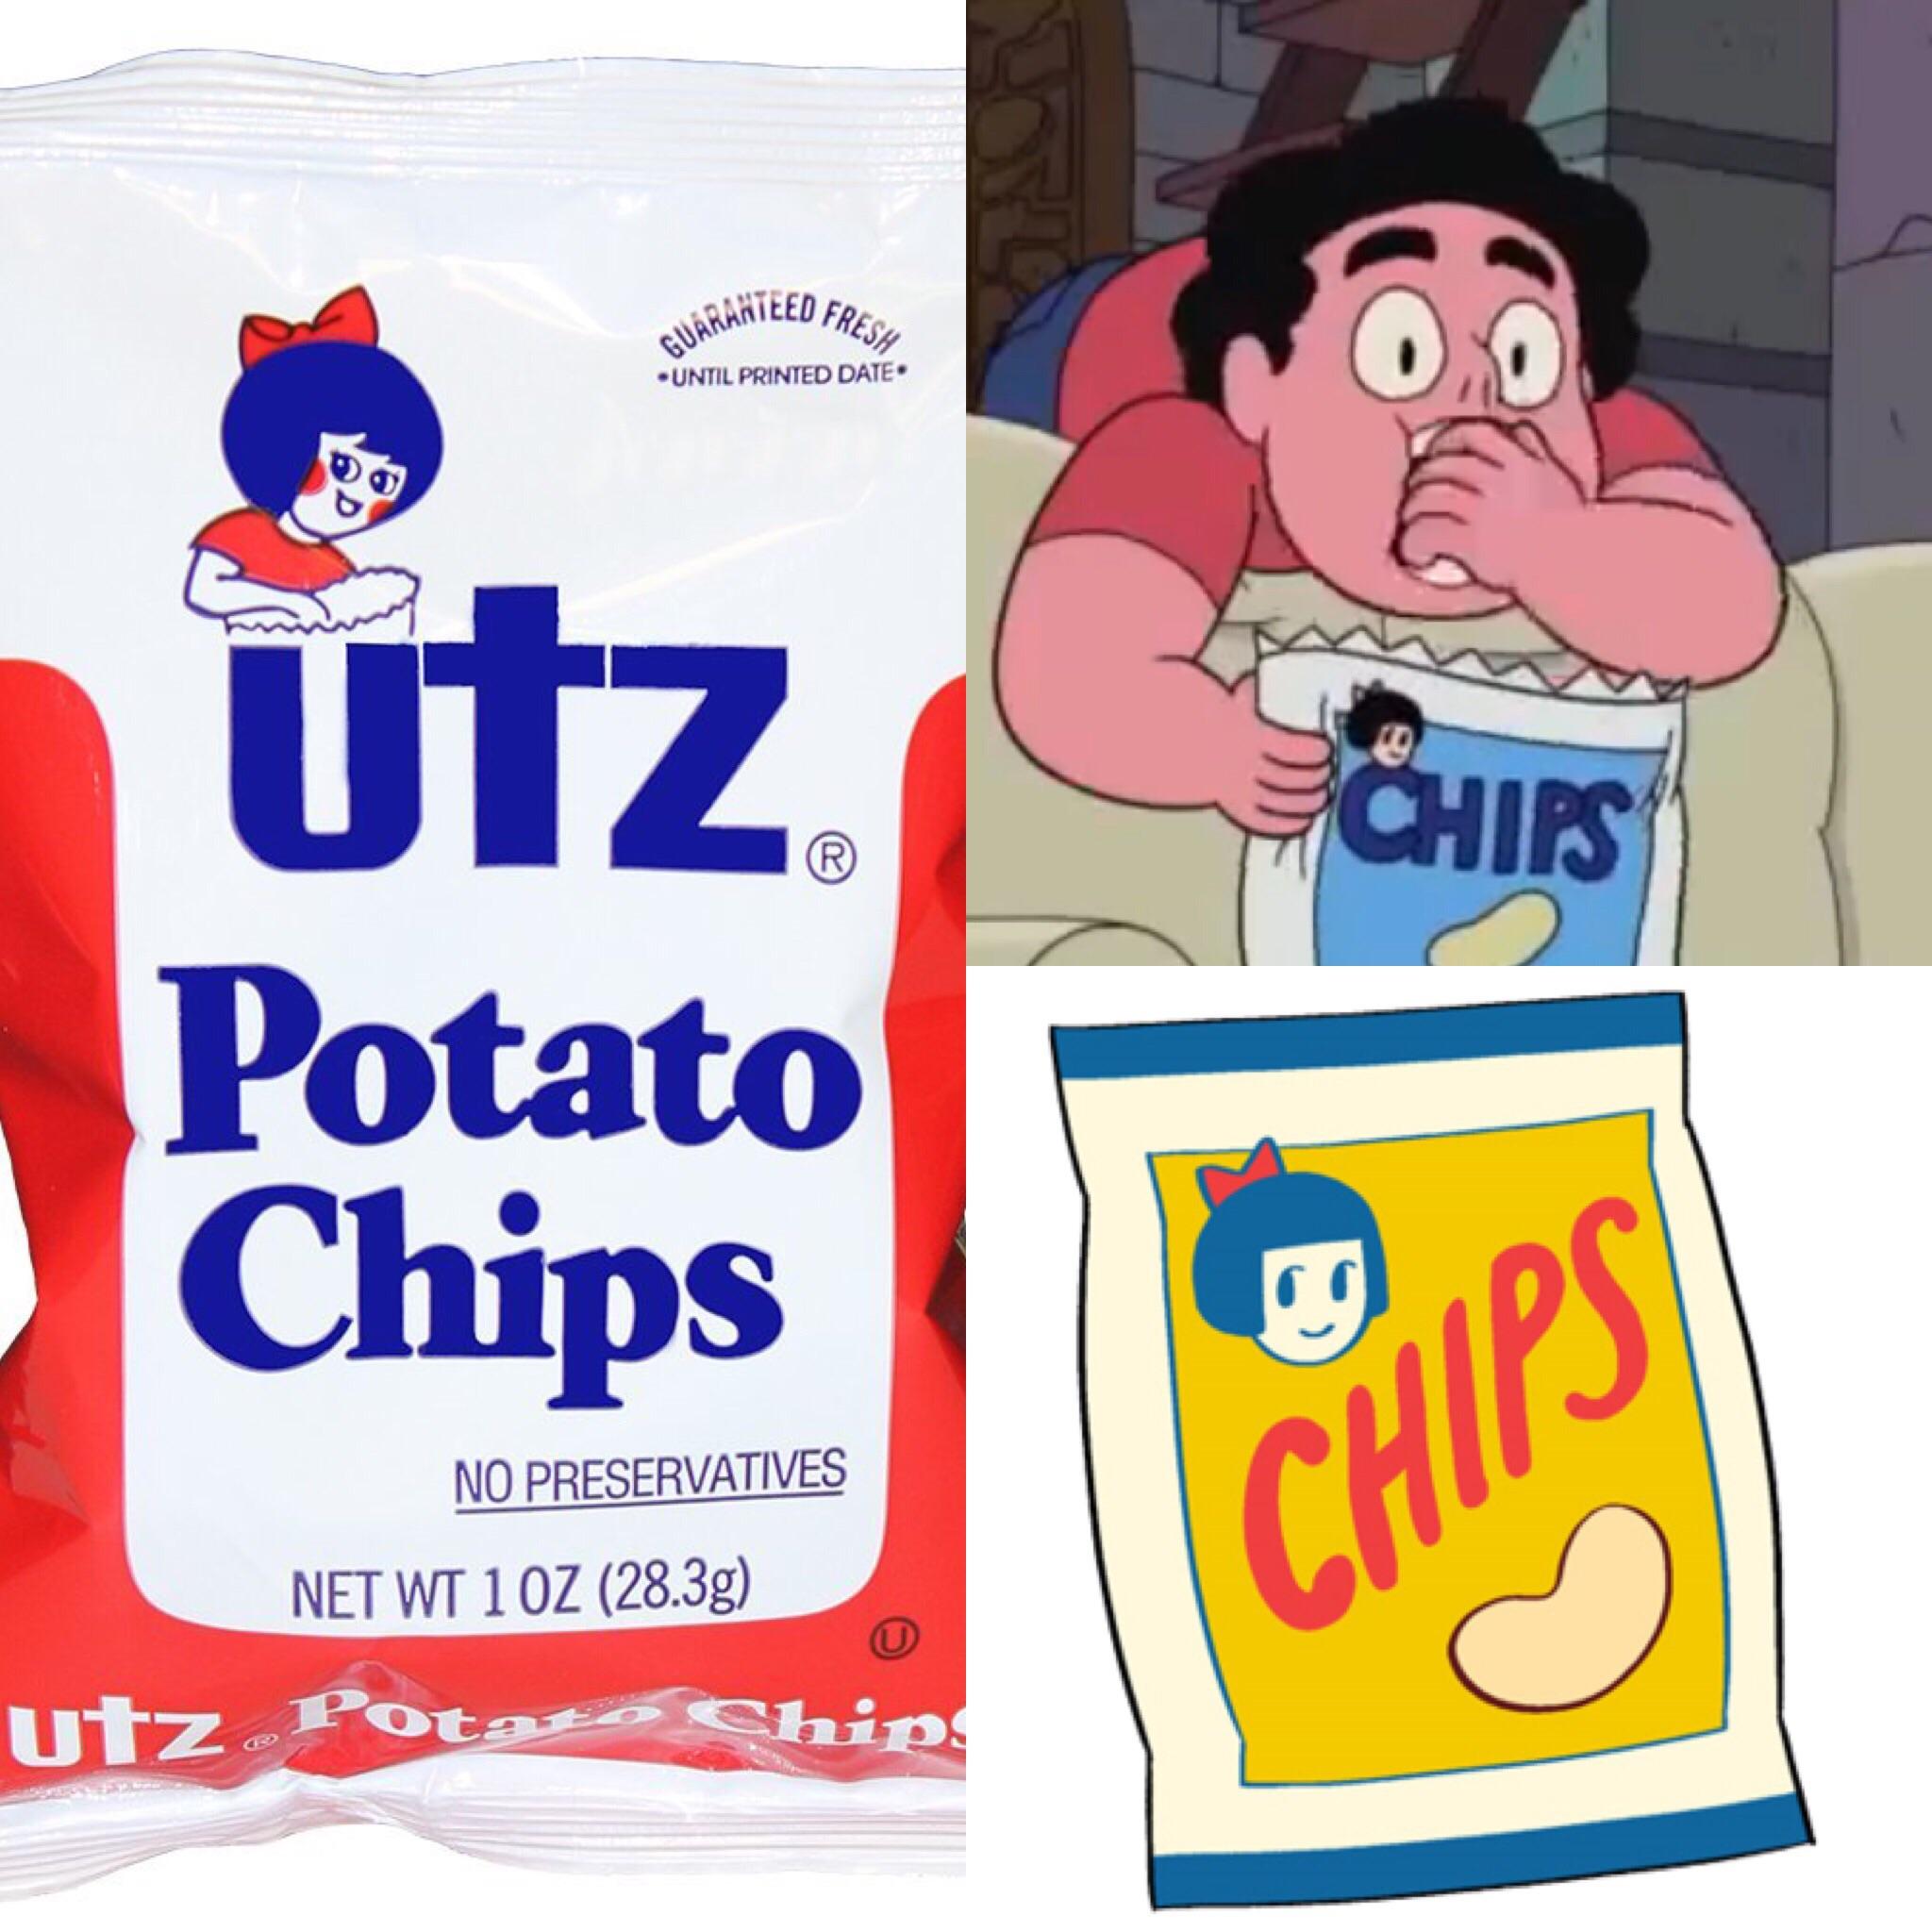 Utz Logo - The logo on the chips in SU looks like the same logo as the local ...